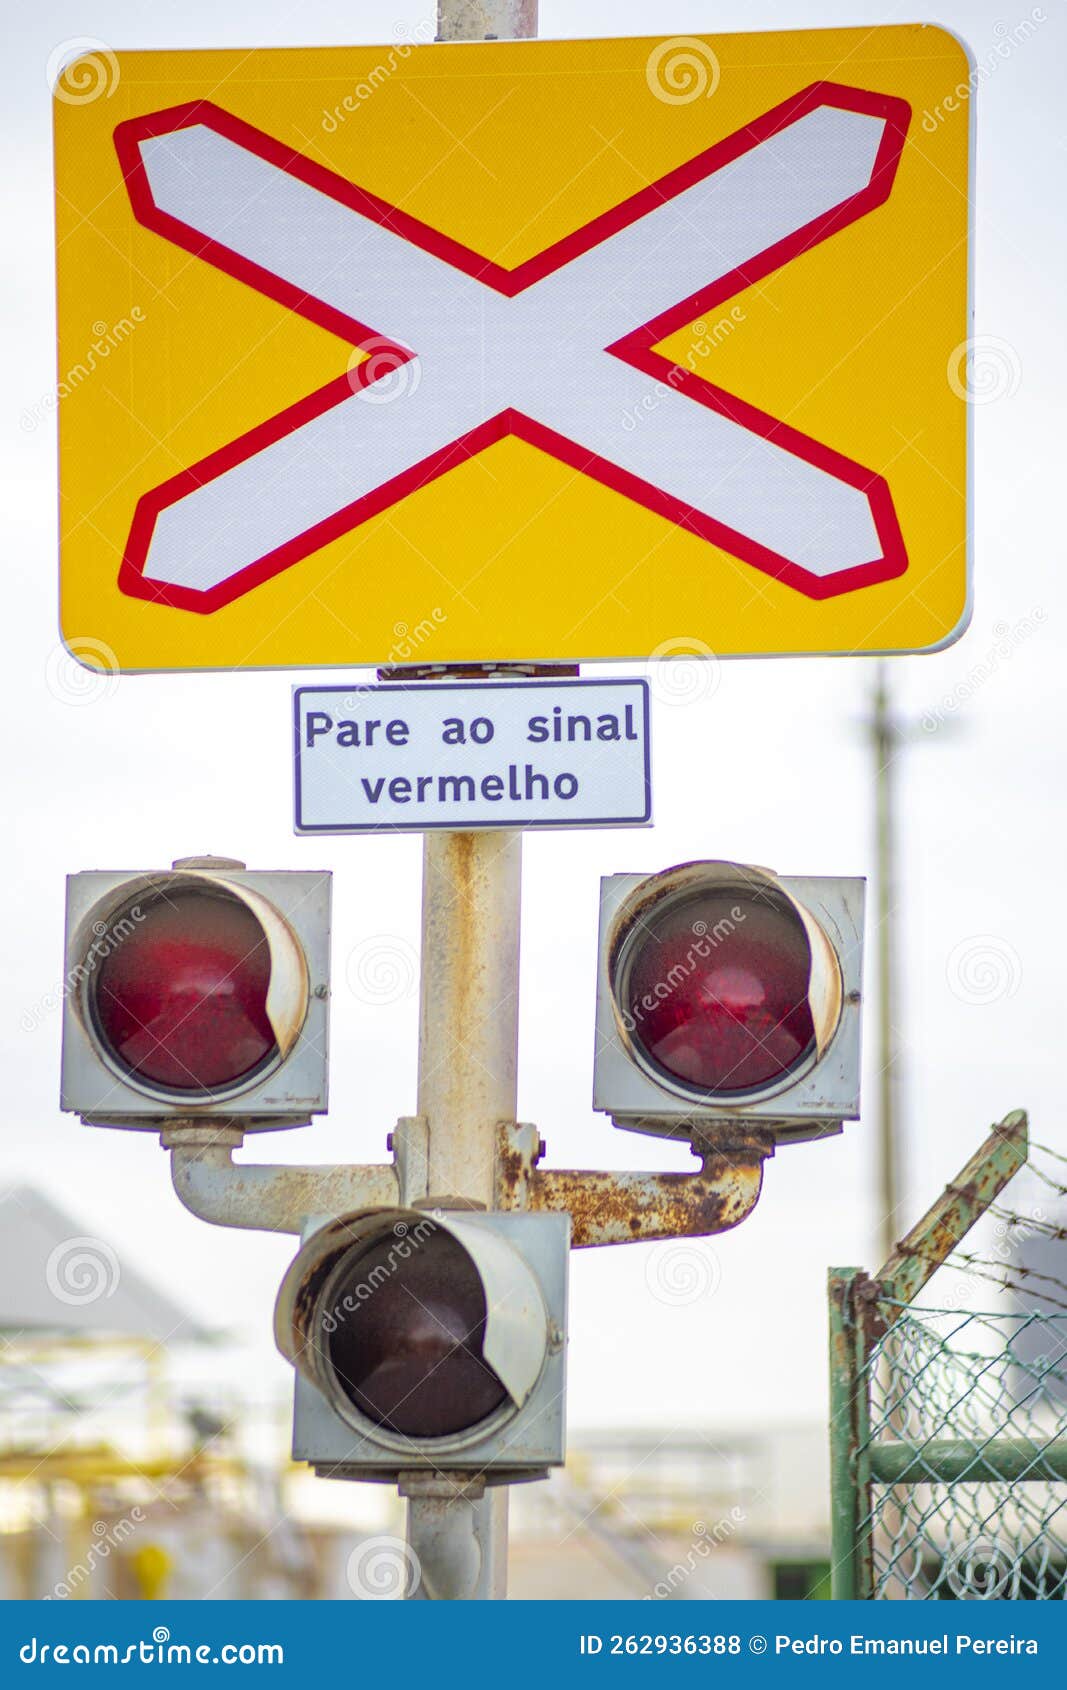 unguarded level crossing traffic sign for trains.  3 traffic lights.  information panel, "pare ao sinal vermelho"